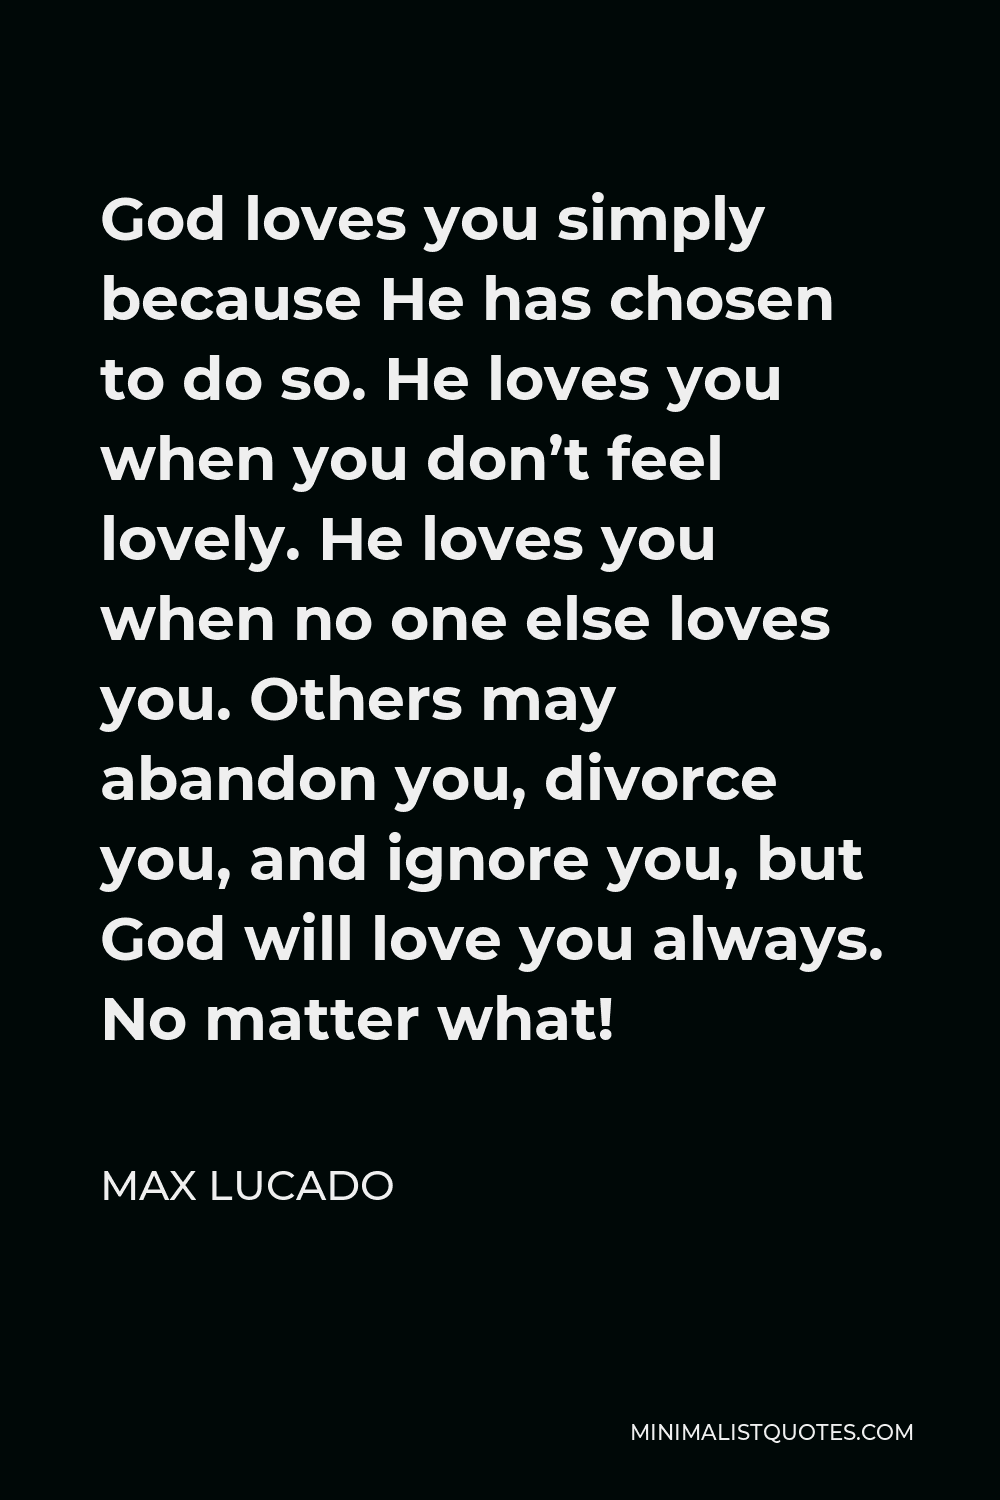 Max Lucado Quote - God loves you simply because He has chosen to do so. He loves you when you don’t feel lovely. He loves you when no one else loves you. Others may abandon you, divorce you, and ignore you, but God will love you always. No matter what!